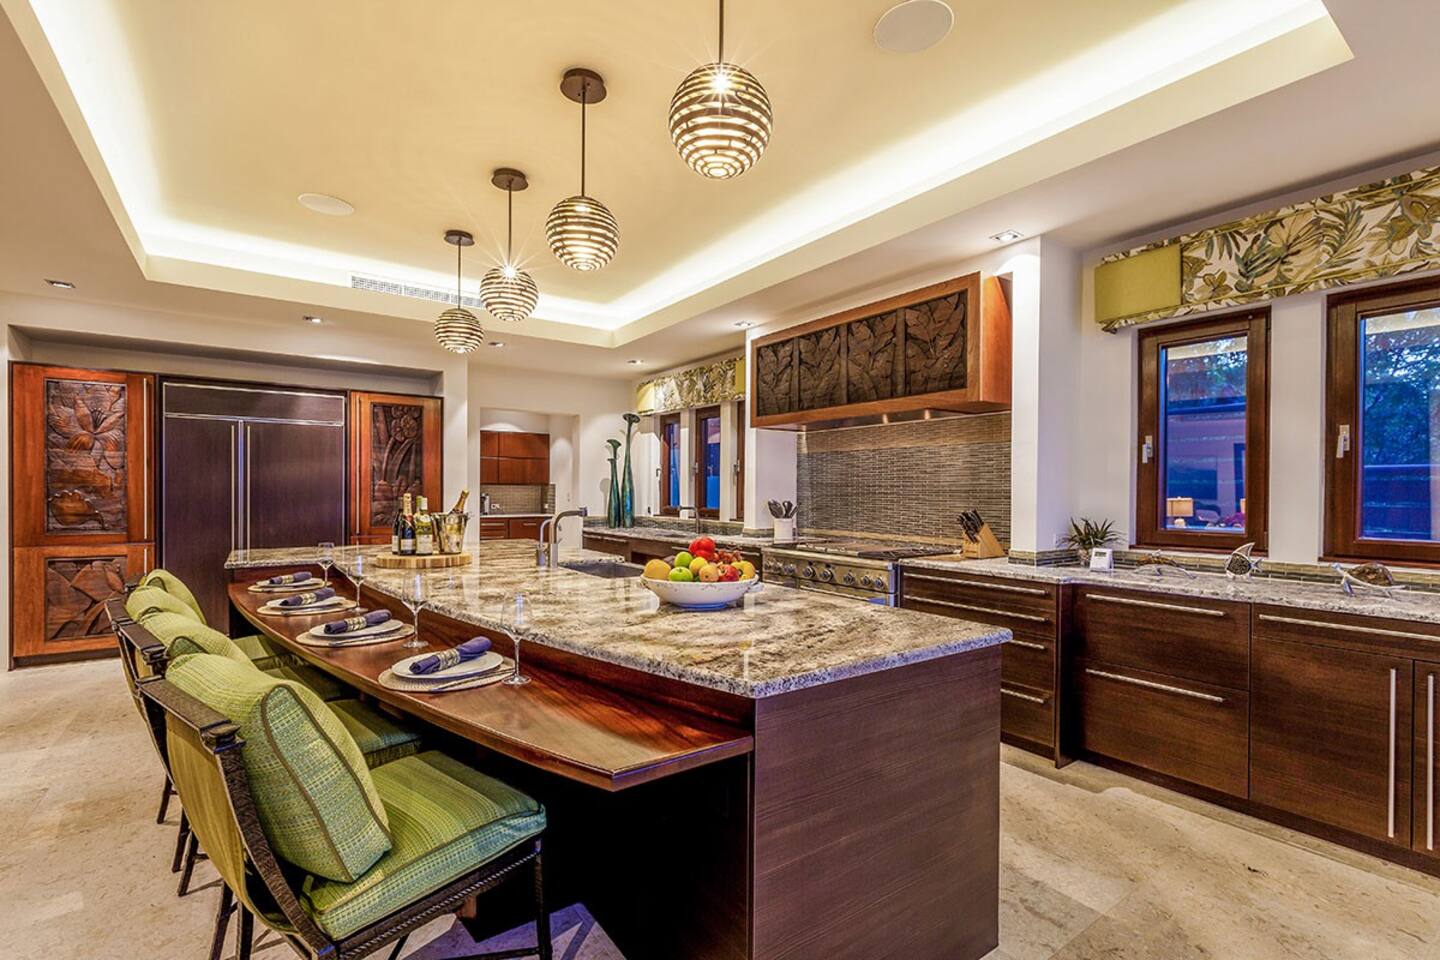 The kitchen features exquisite marble countertops, modern cabinetry, and stylish pendant lights.